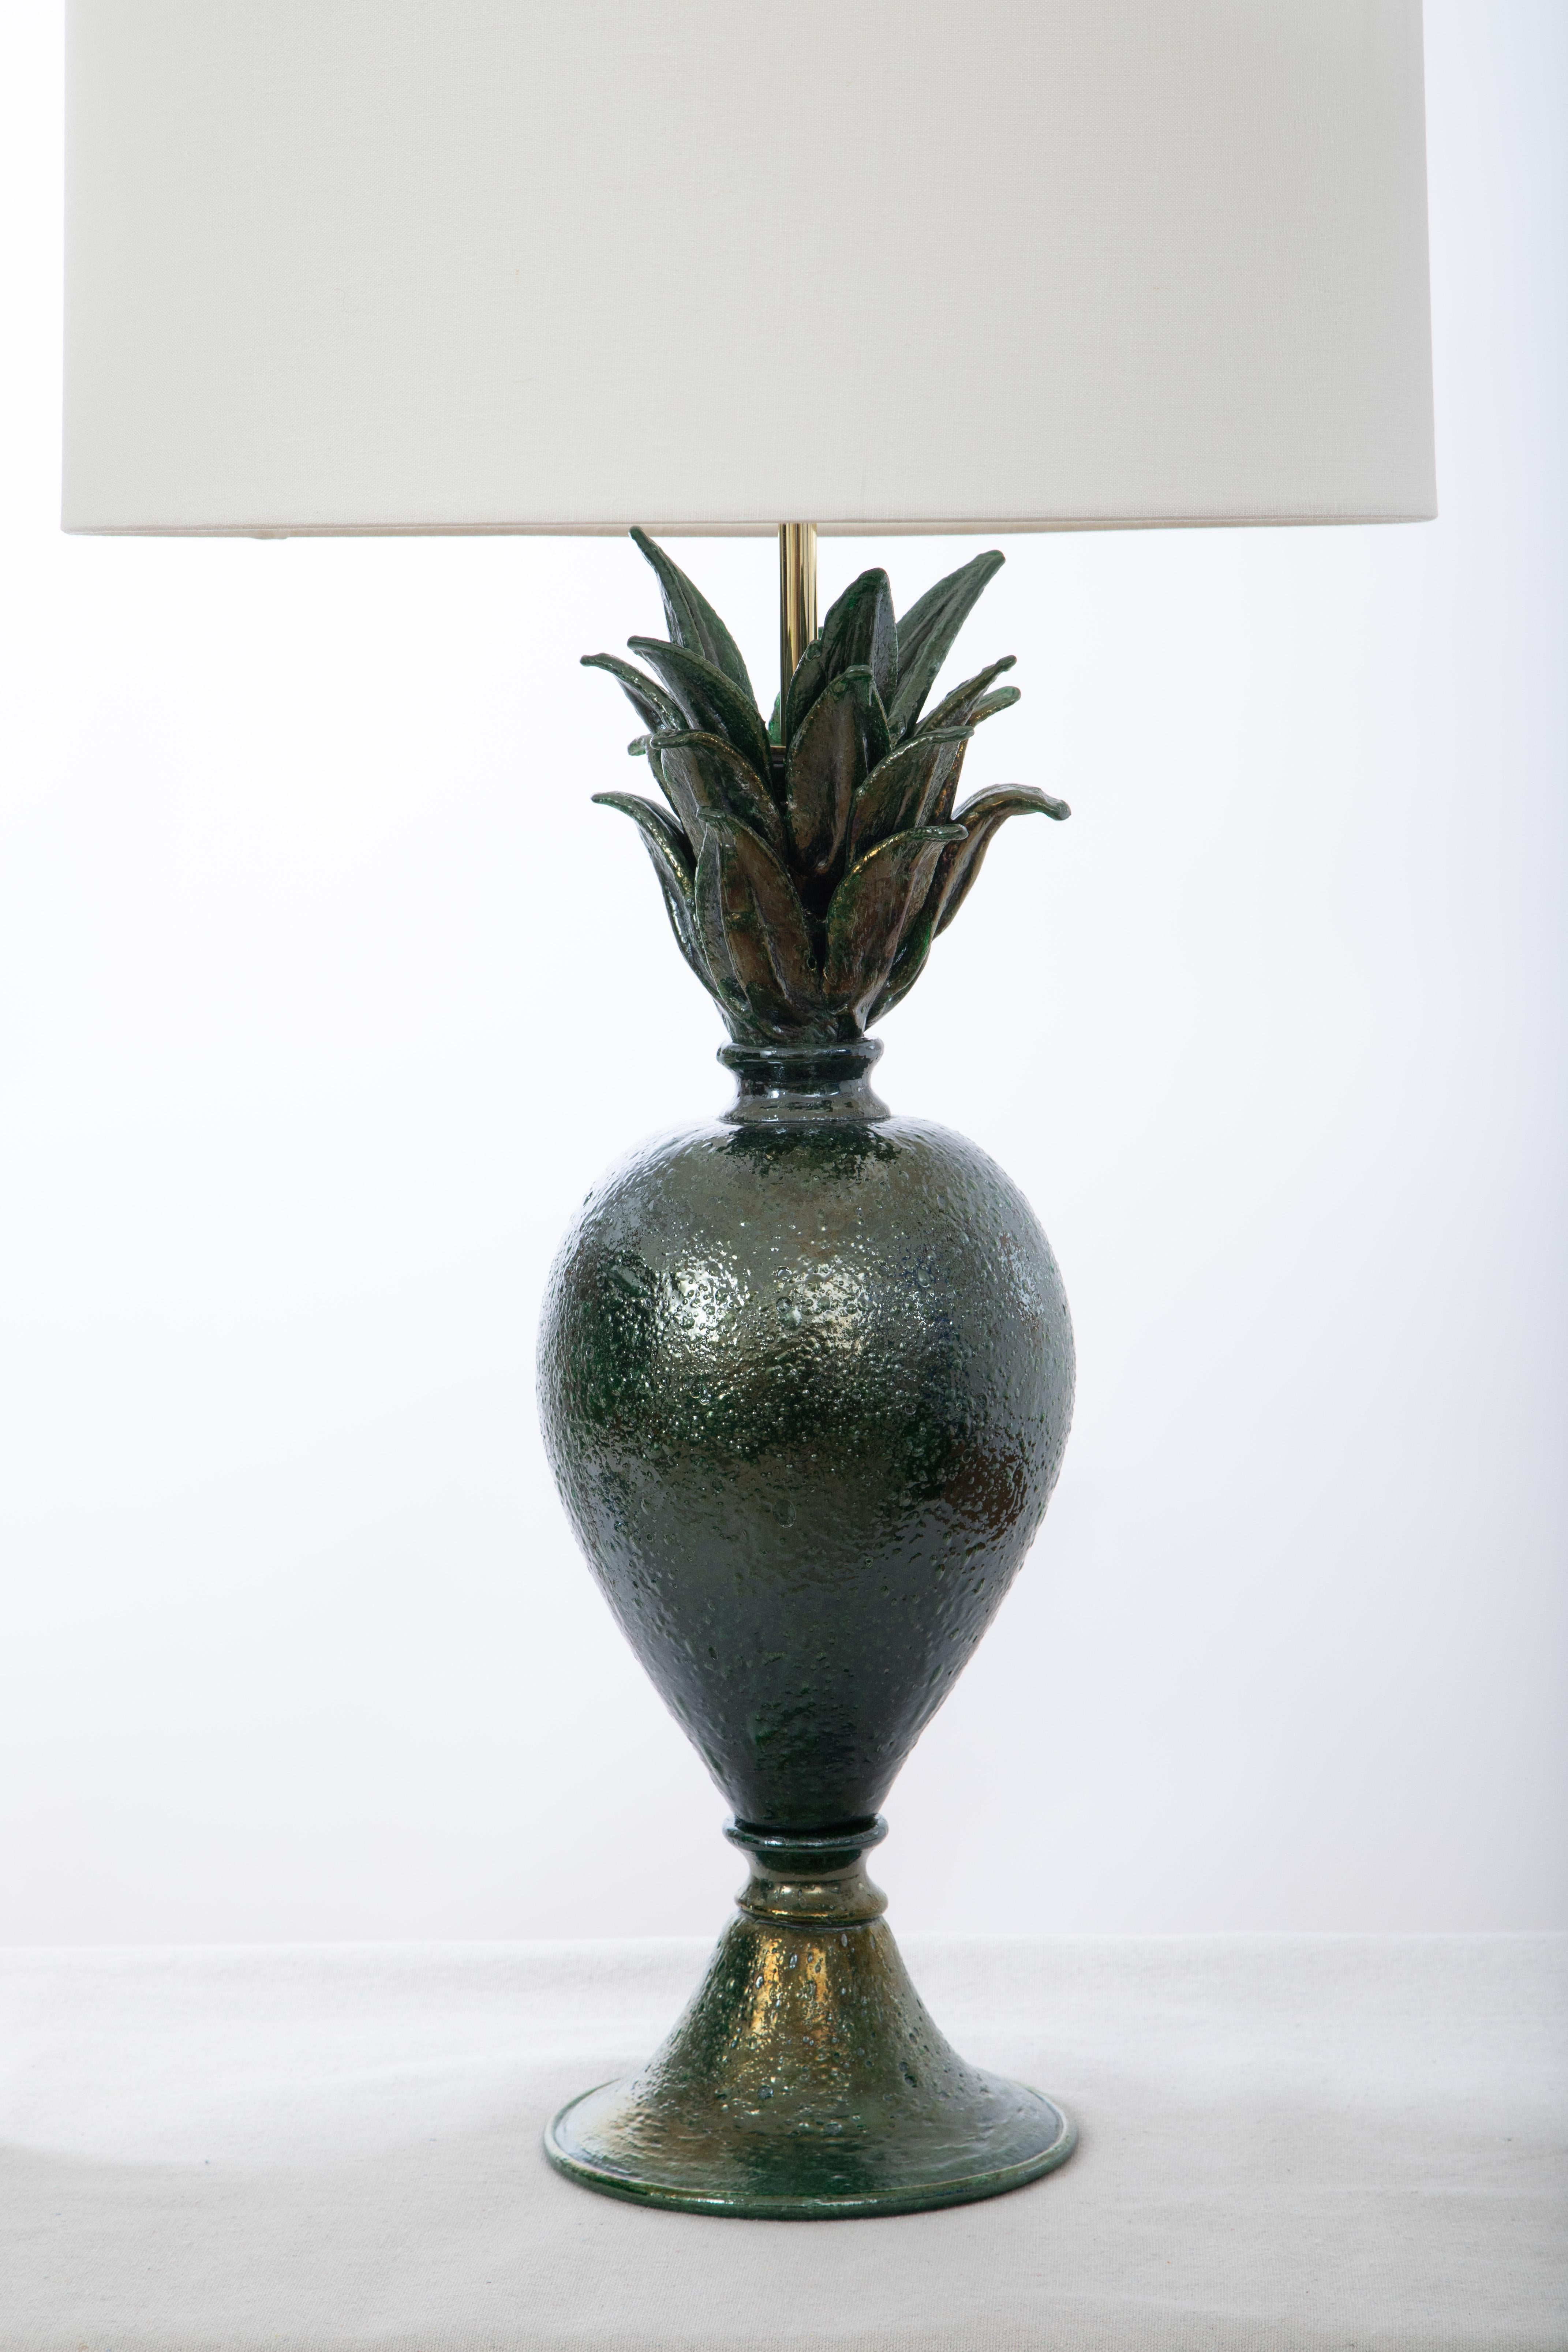 Pair of green Pulegoso Murano table lamps, in stock
Pineapple shape and beautiful dark green color and texture
This pair is one of kind, studio built
Shades not included
Wired to the American standard.

